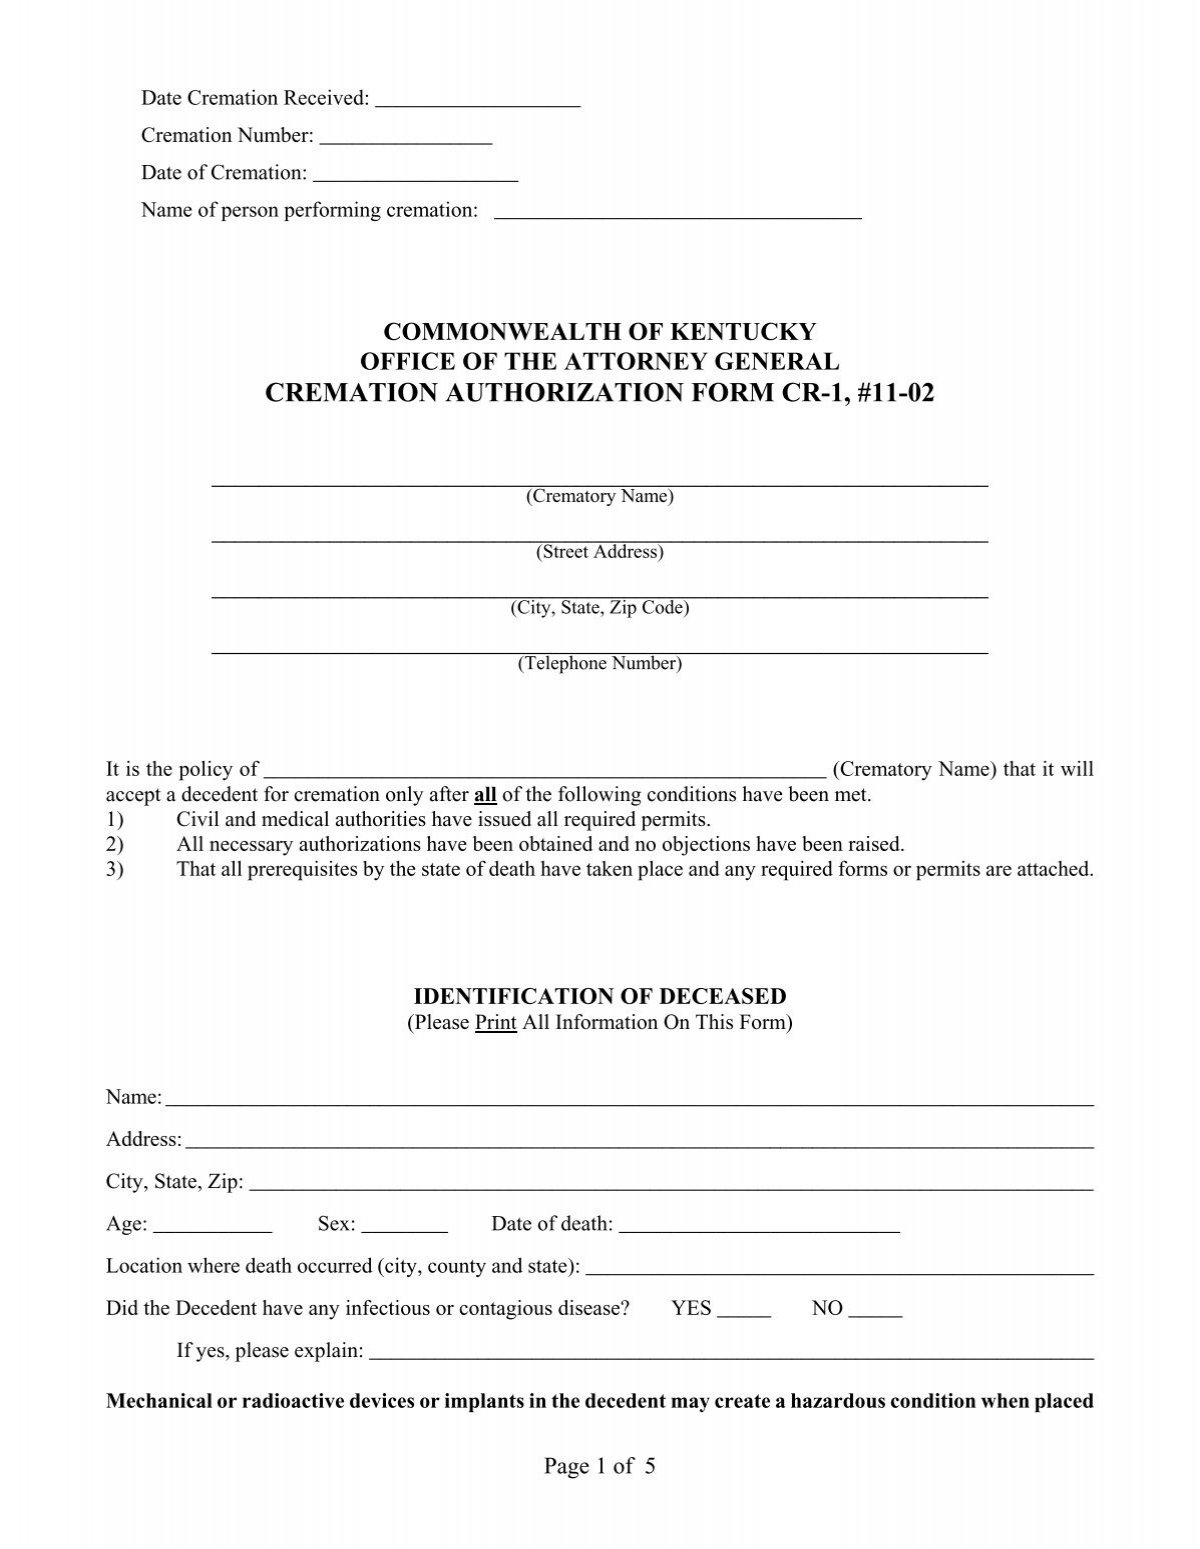 Cremation Authorization Form Cr 1 Grissom Martin Funeral Home 5917